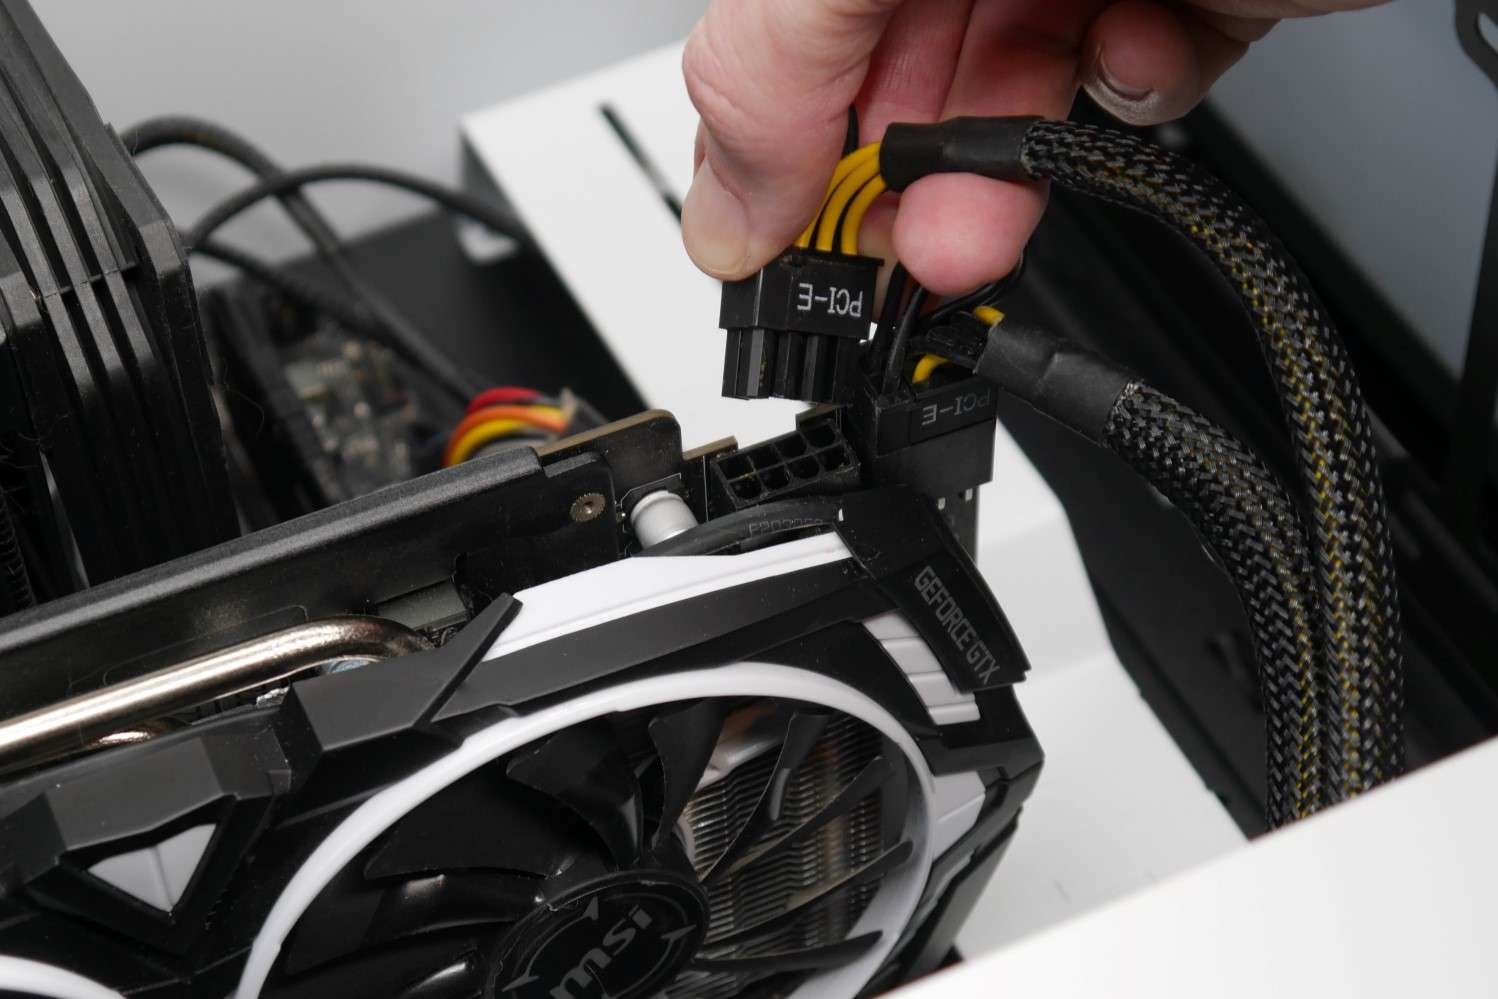 Ensure that the GPU is properly seated in the motherboard slot.
Check all power cables connected to the GPU and ensure they are securely plugged in.